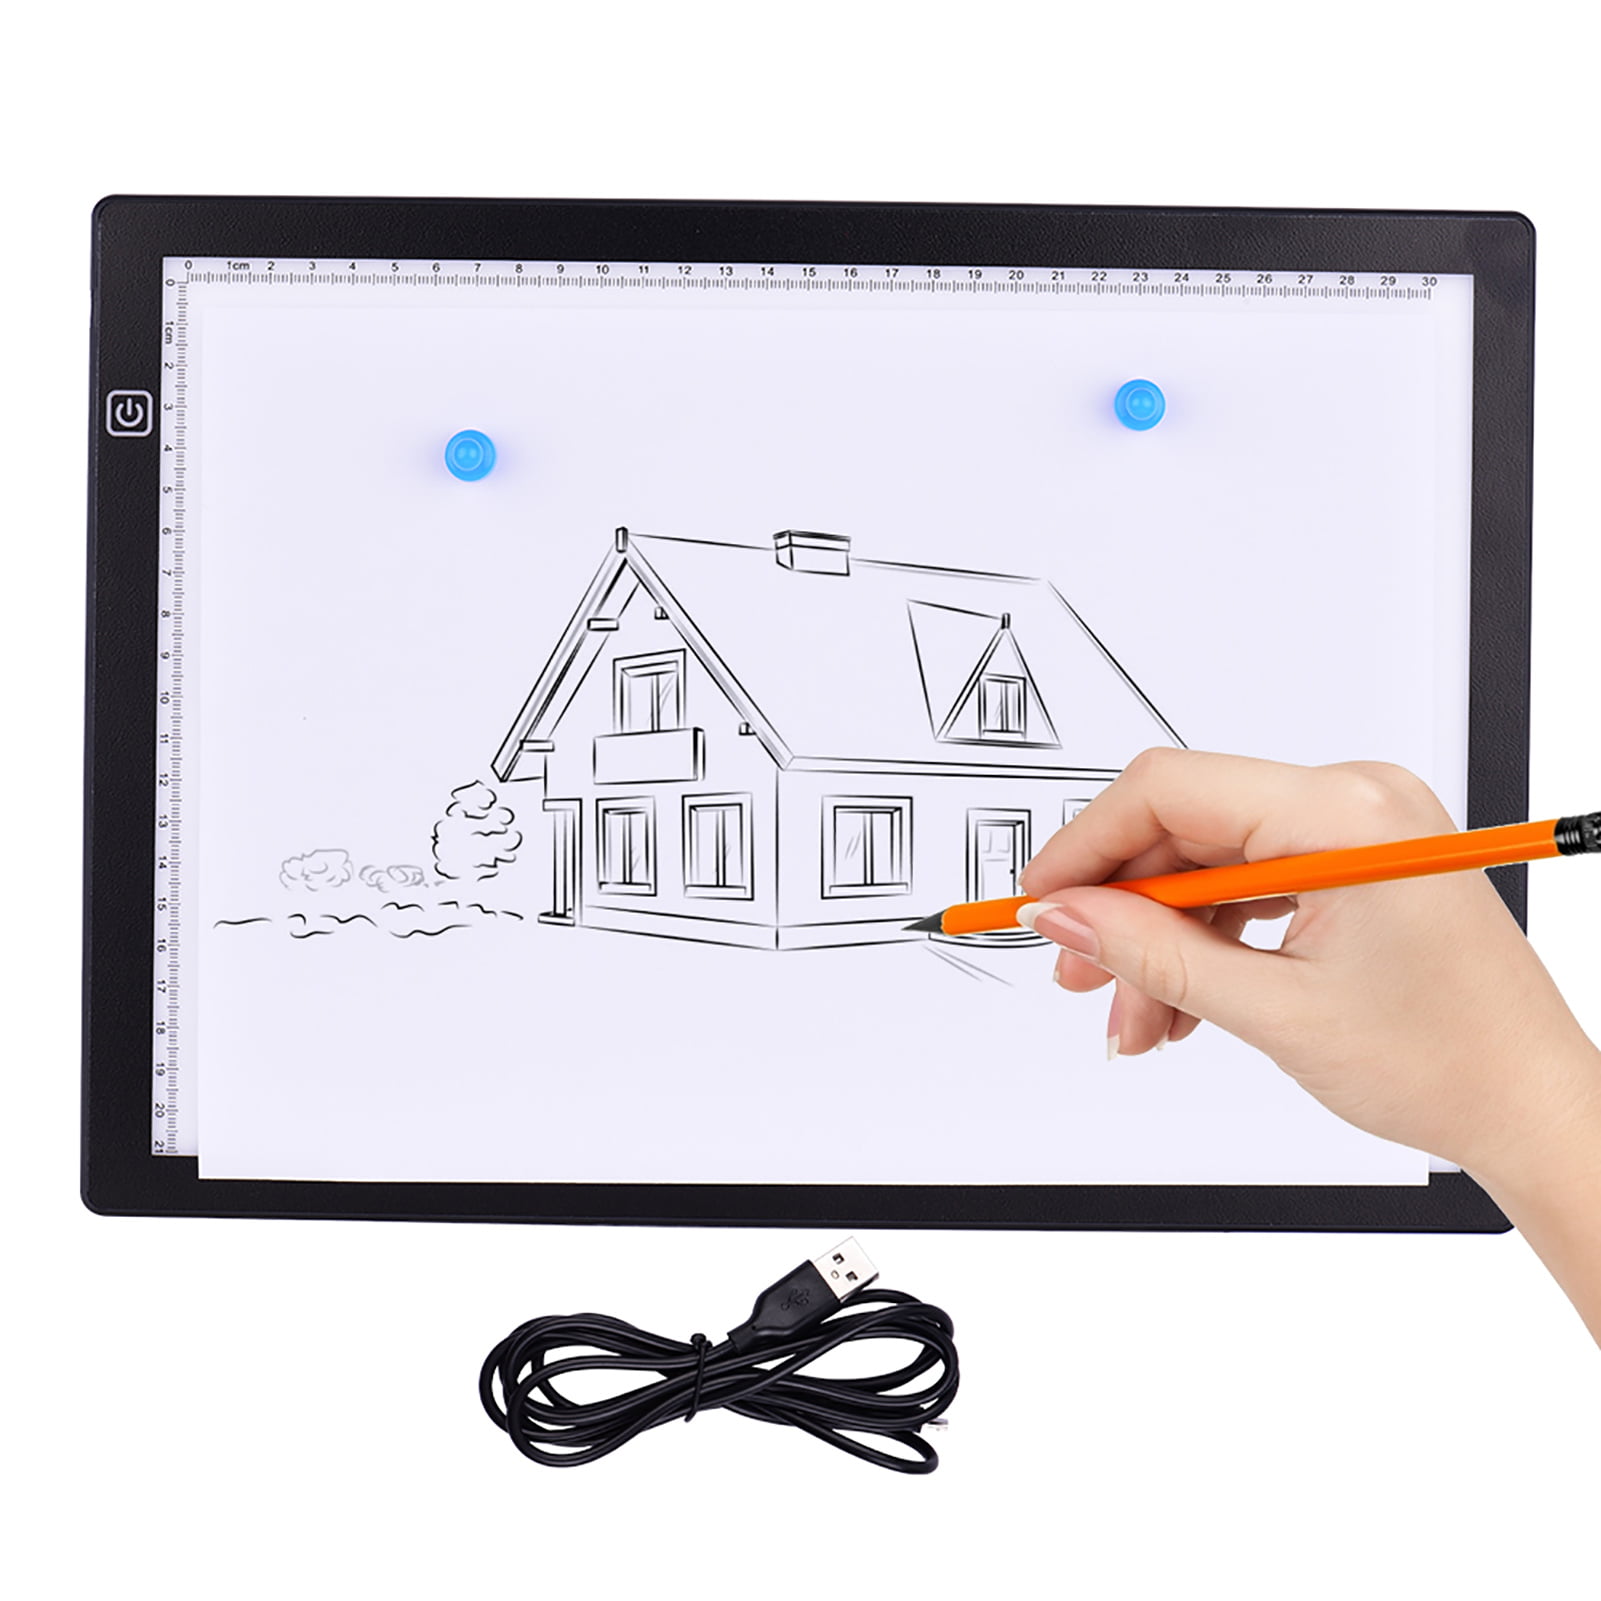 LED A4 Light Box Copy Board Portable Dimmable Brightness Drawing Board Tracing Light Pad Box for Diamond Painting Sketching Artists Painting